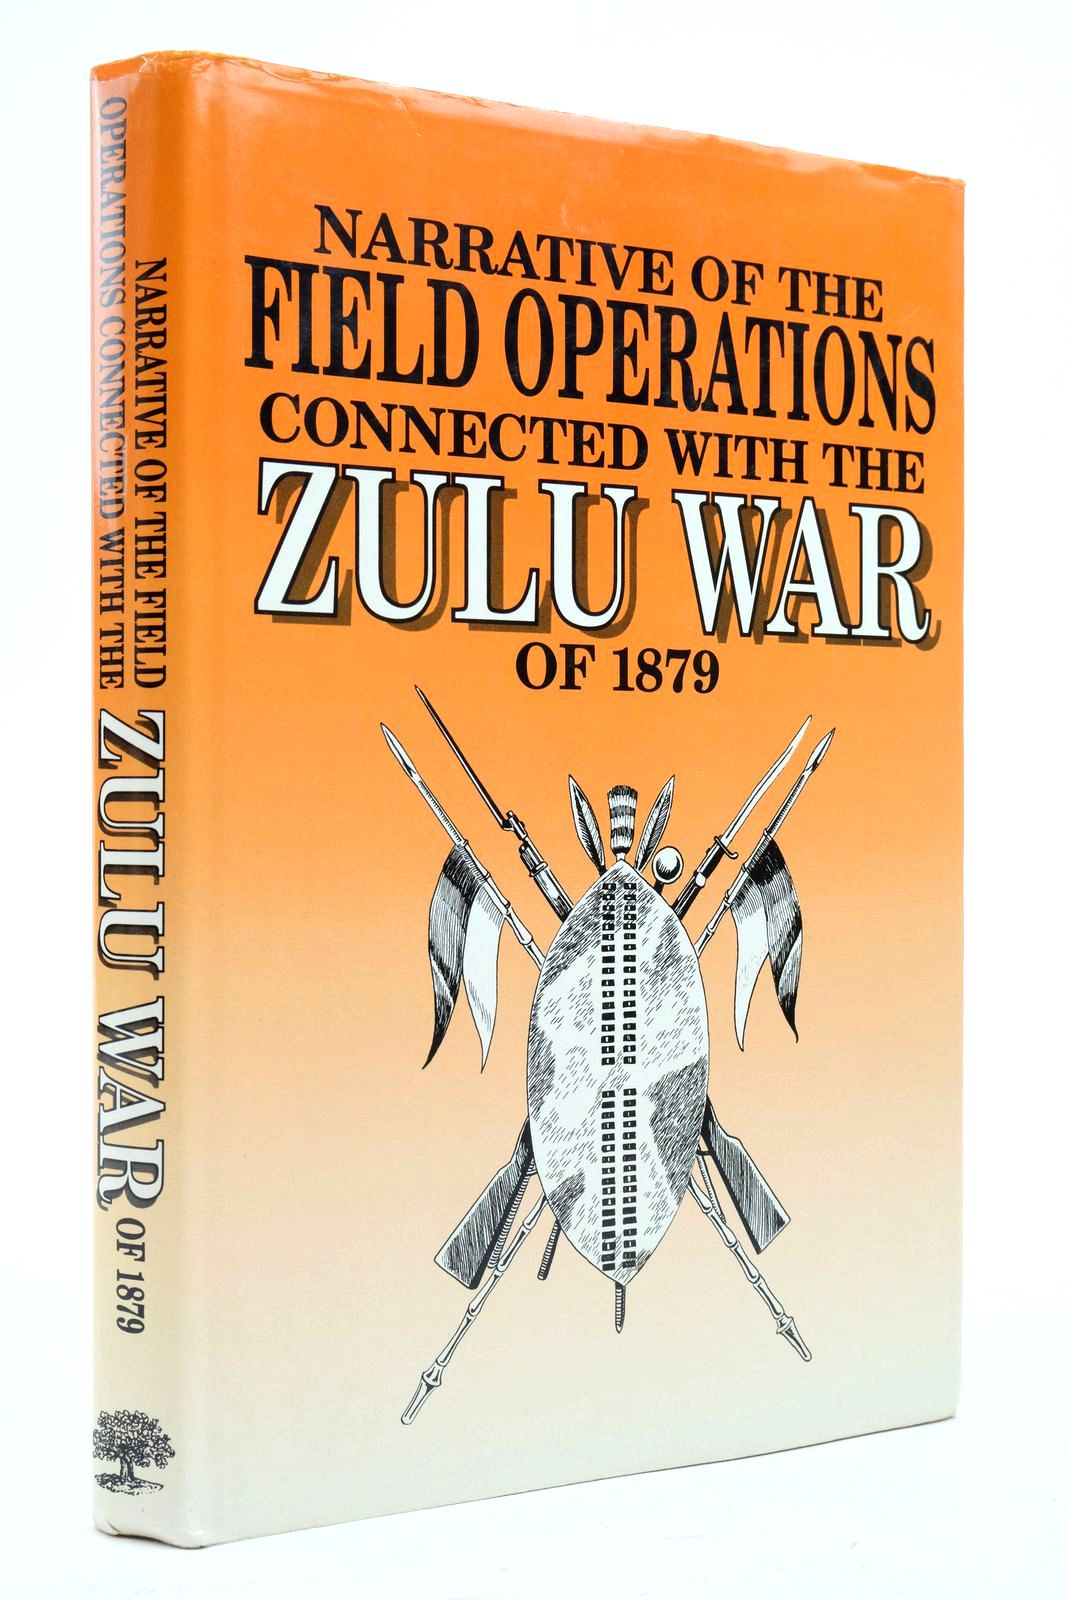 Photo of NARRATIVE OF THE FIELD OPERATIONS CONNECTED WITH THE ZULU WAR OF 1879 written by Rothwell, J.S. published by Greenhill Books (STOCK CODE: 2138049)  for sale by Stella & Rose's Books